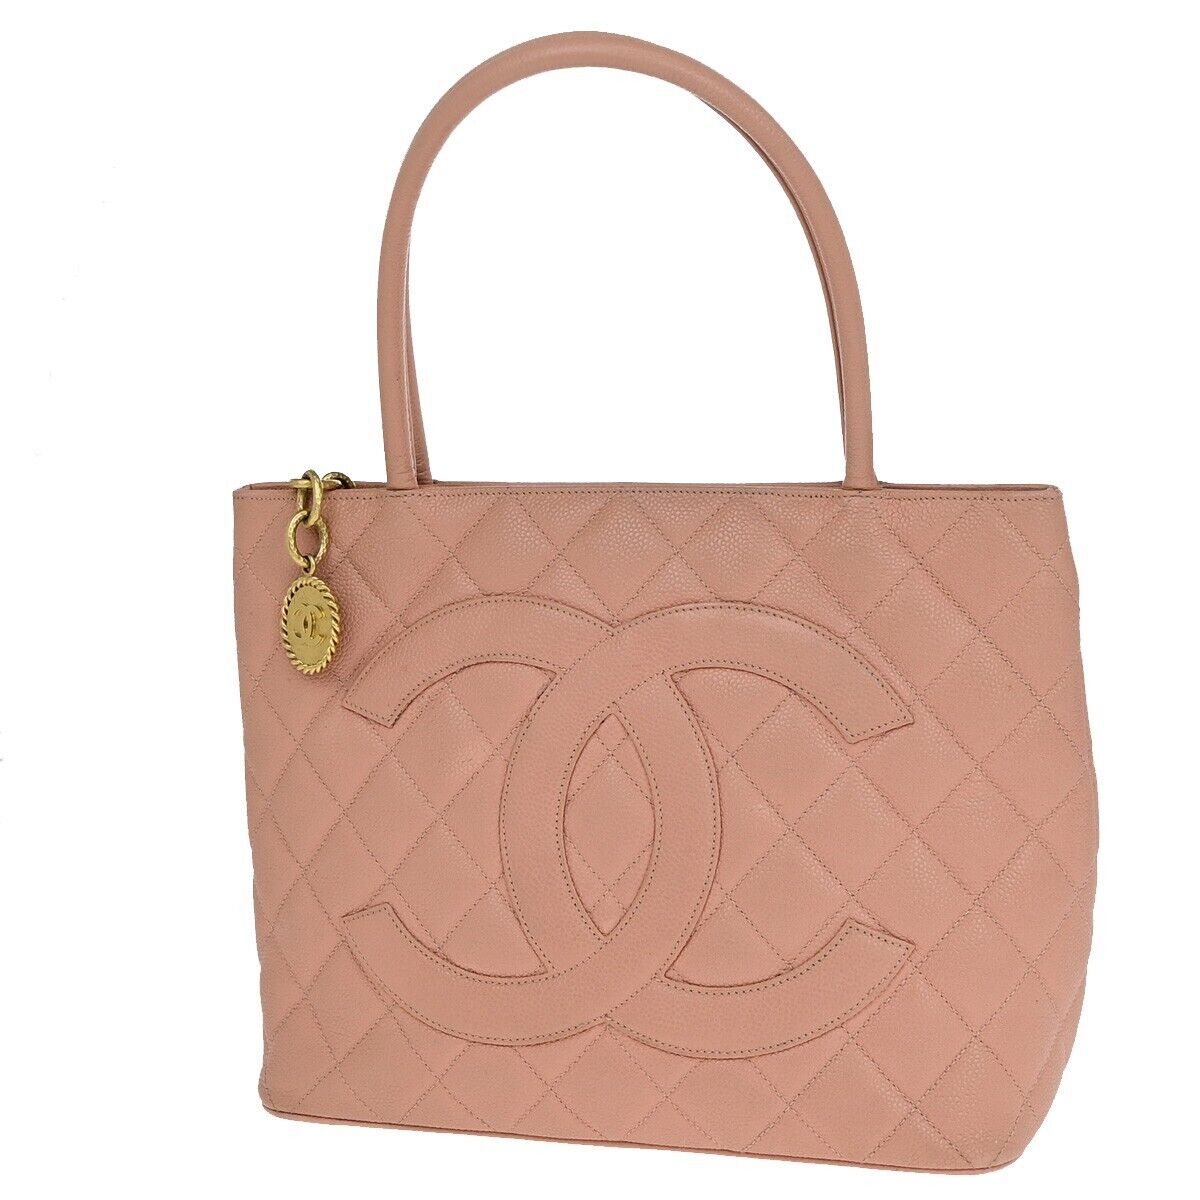 Pre-owned Chanel Médaillon Pink Leather Tote Bag ()